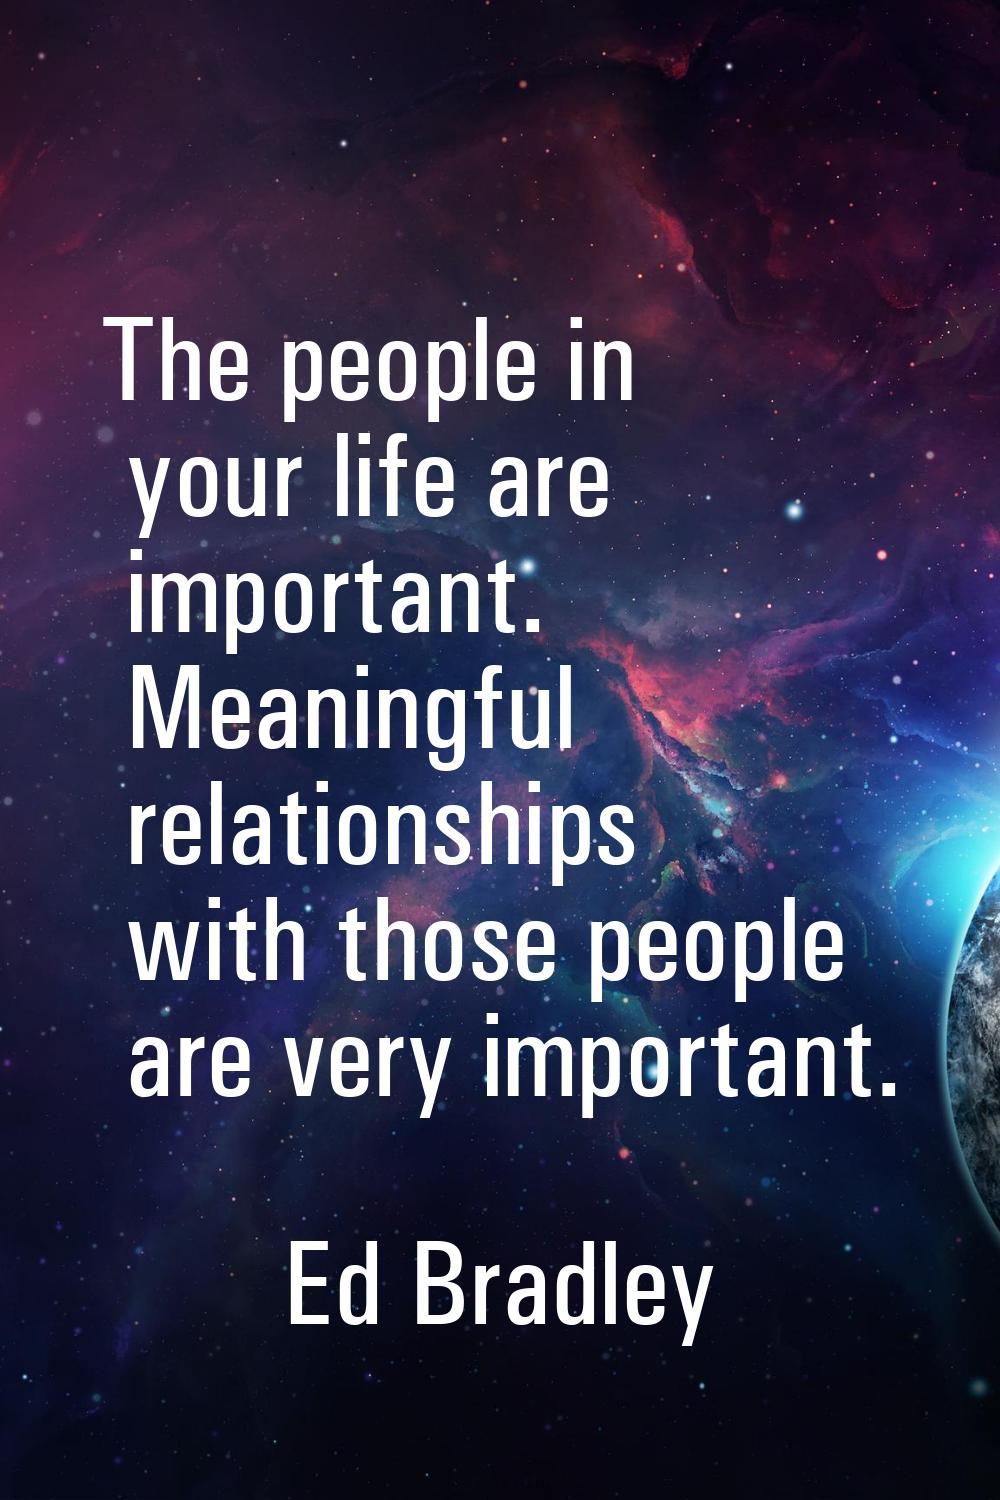 The people in your life are important. Meaningful relationships with those people are very importan